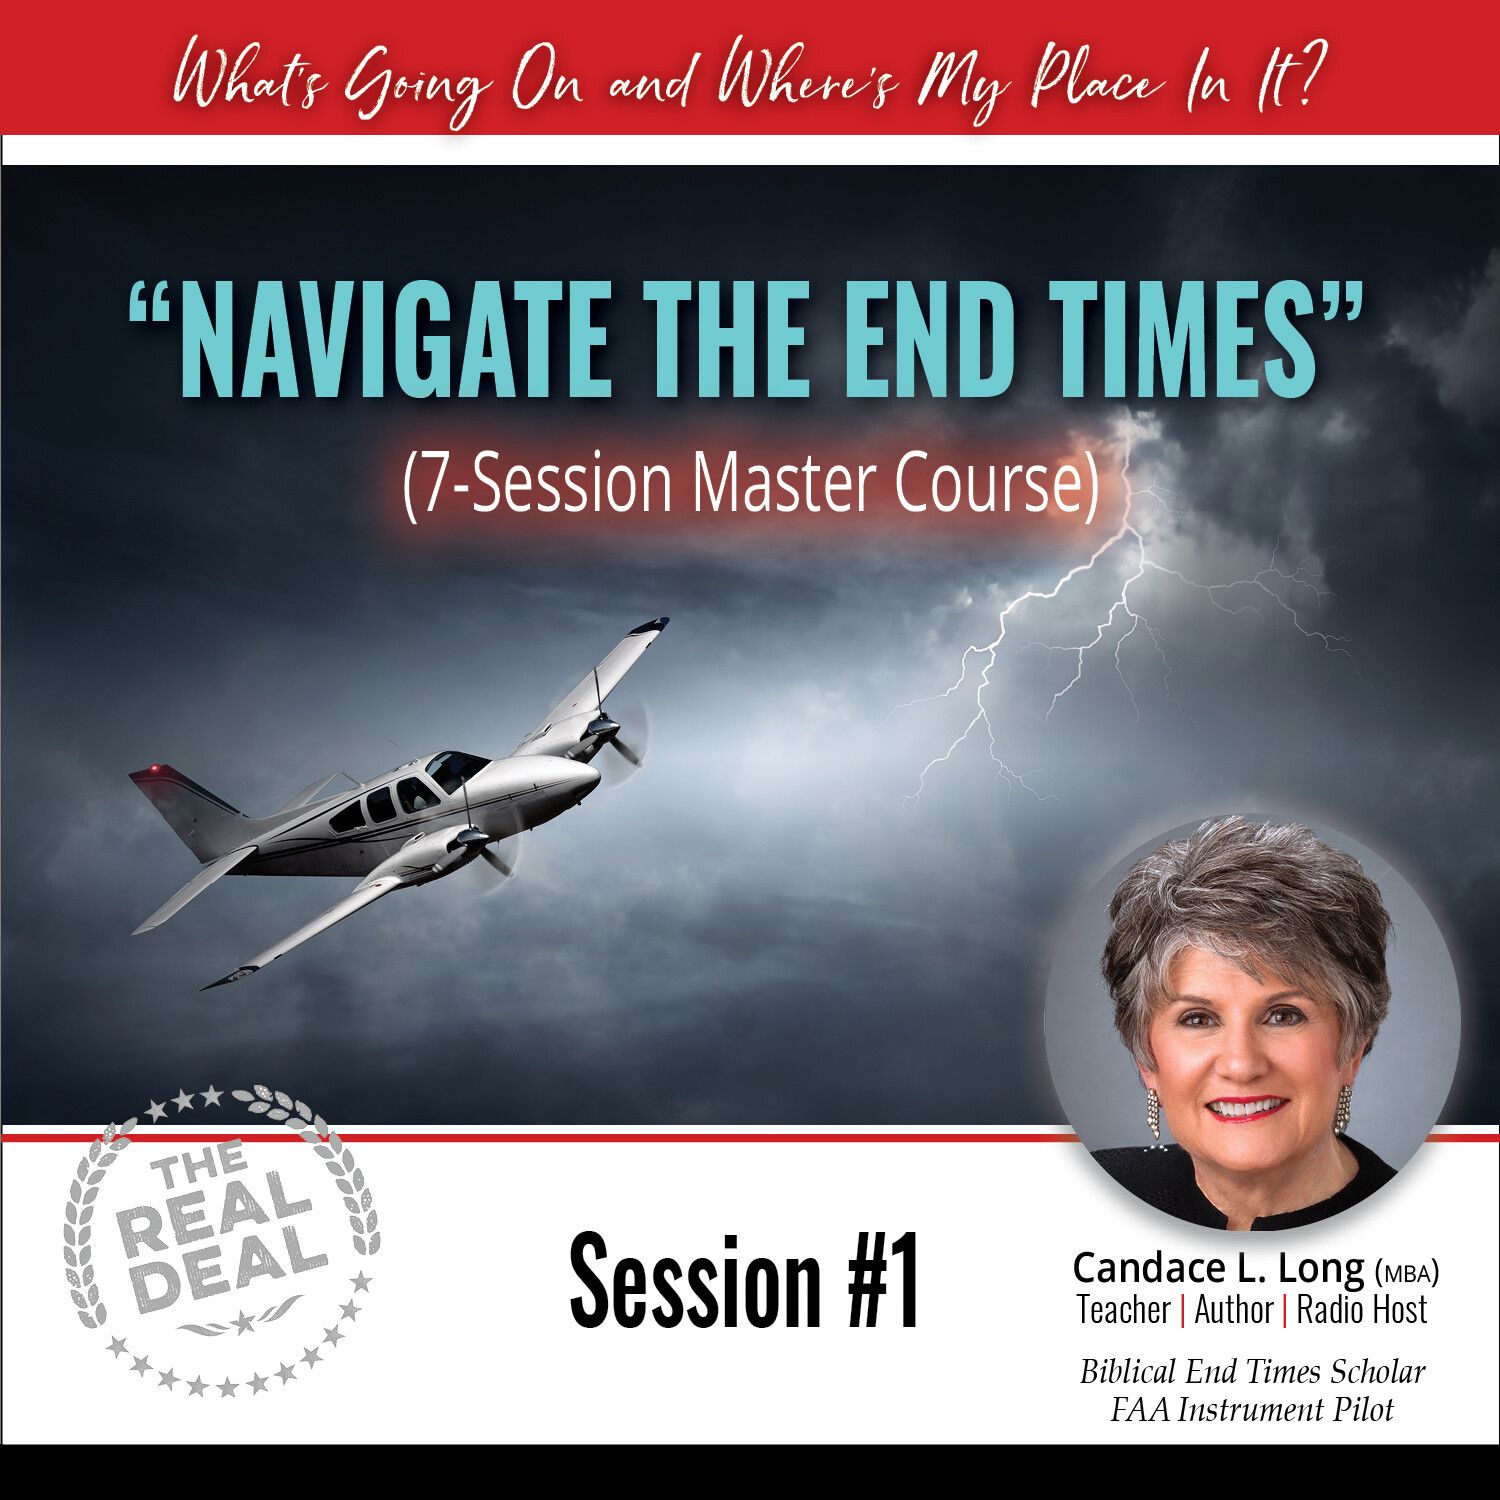 Session #1: God's Times and Seasons